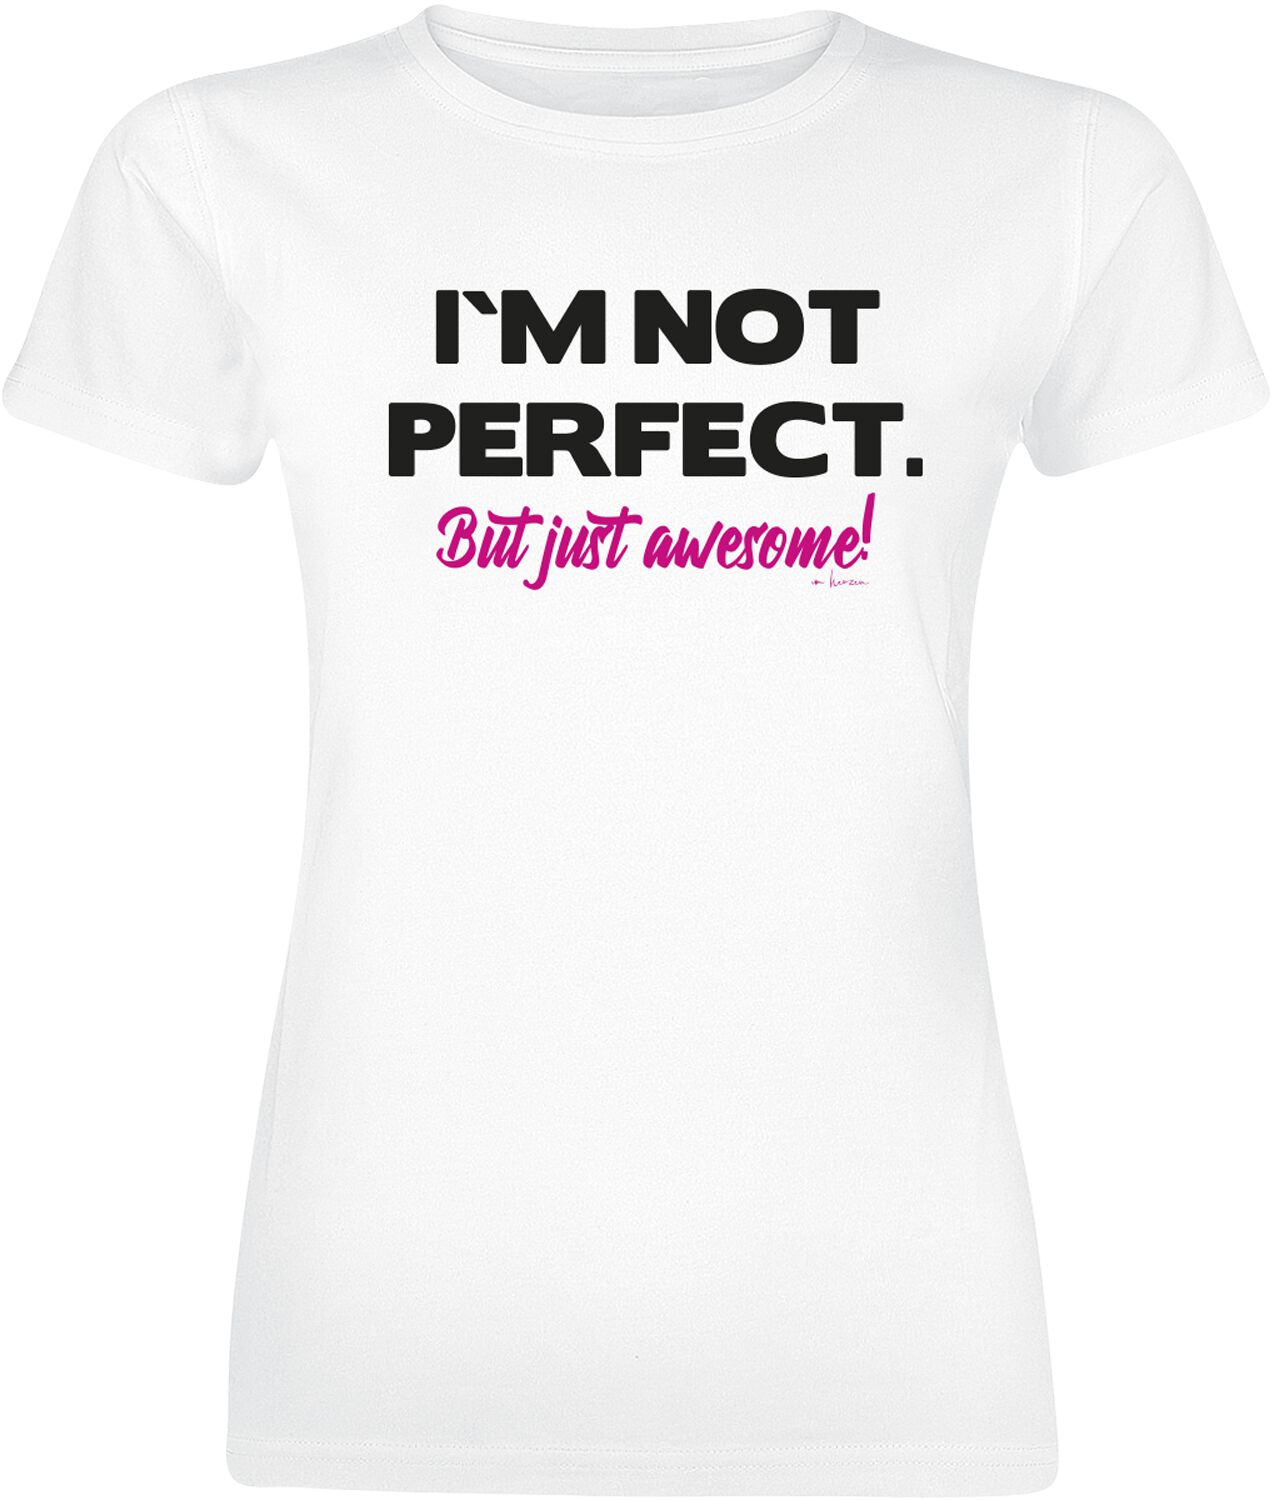 Slogans I'm Not Perfect. But Just Awesome! T-Shirt white